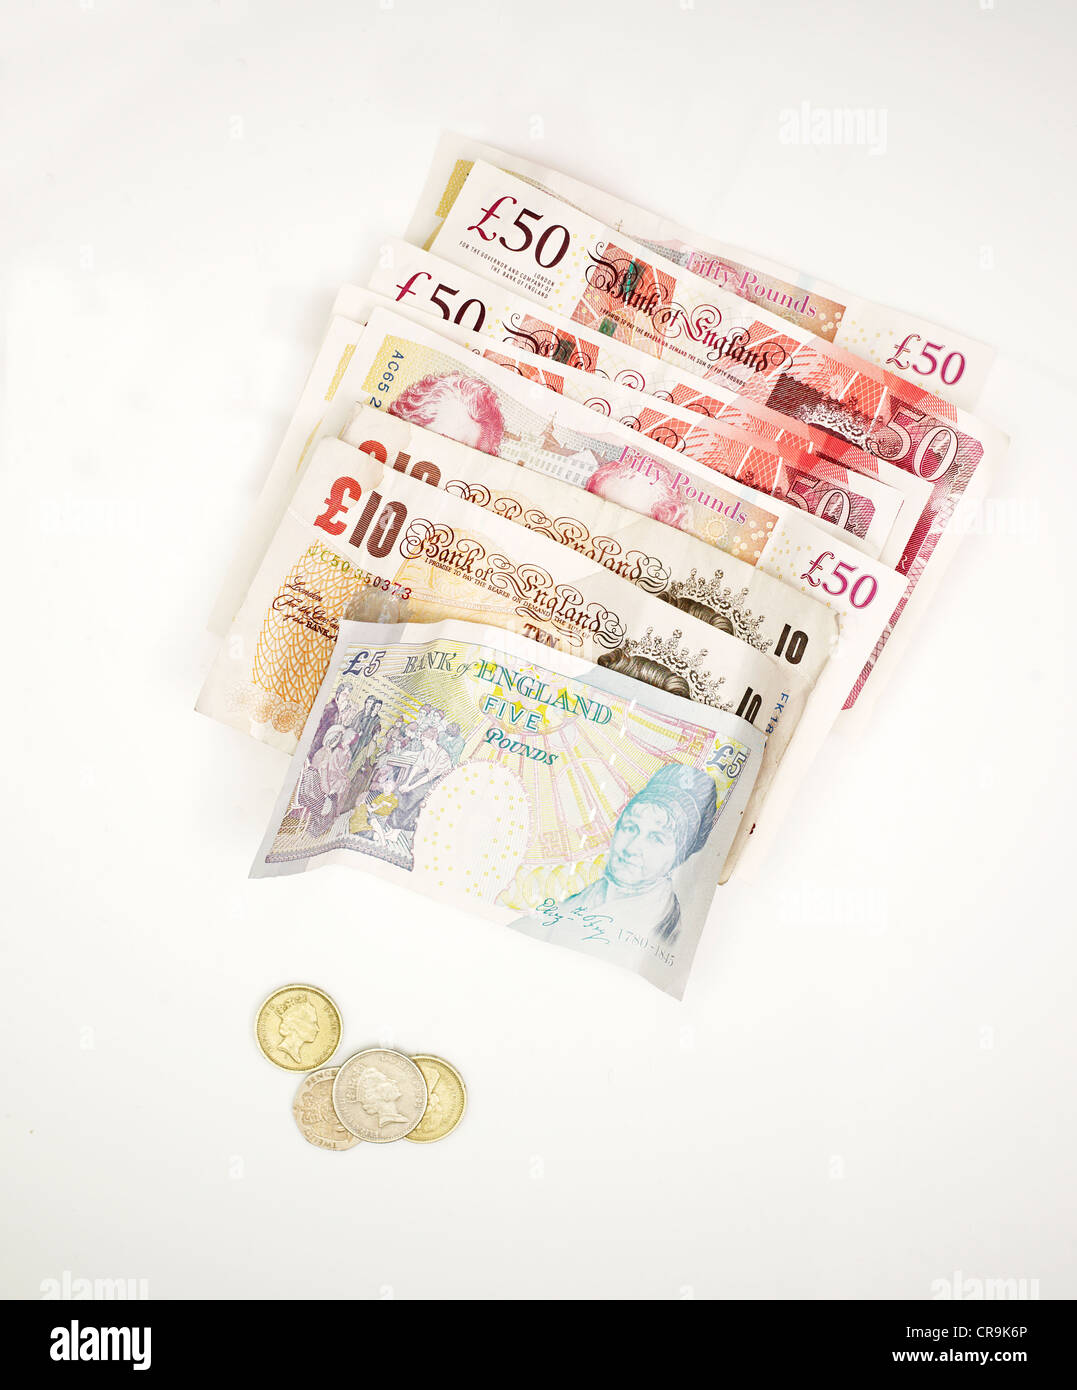 British notes and coins Stock Photo